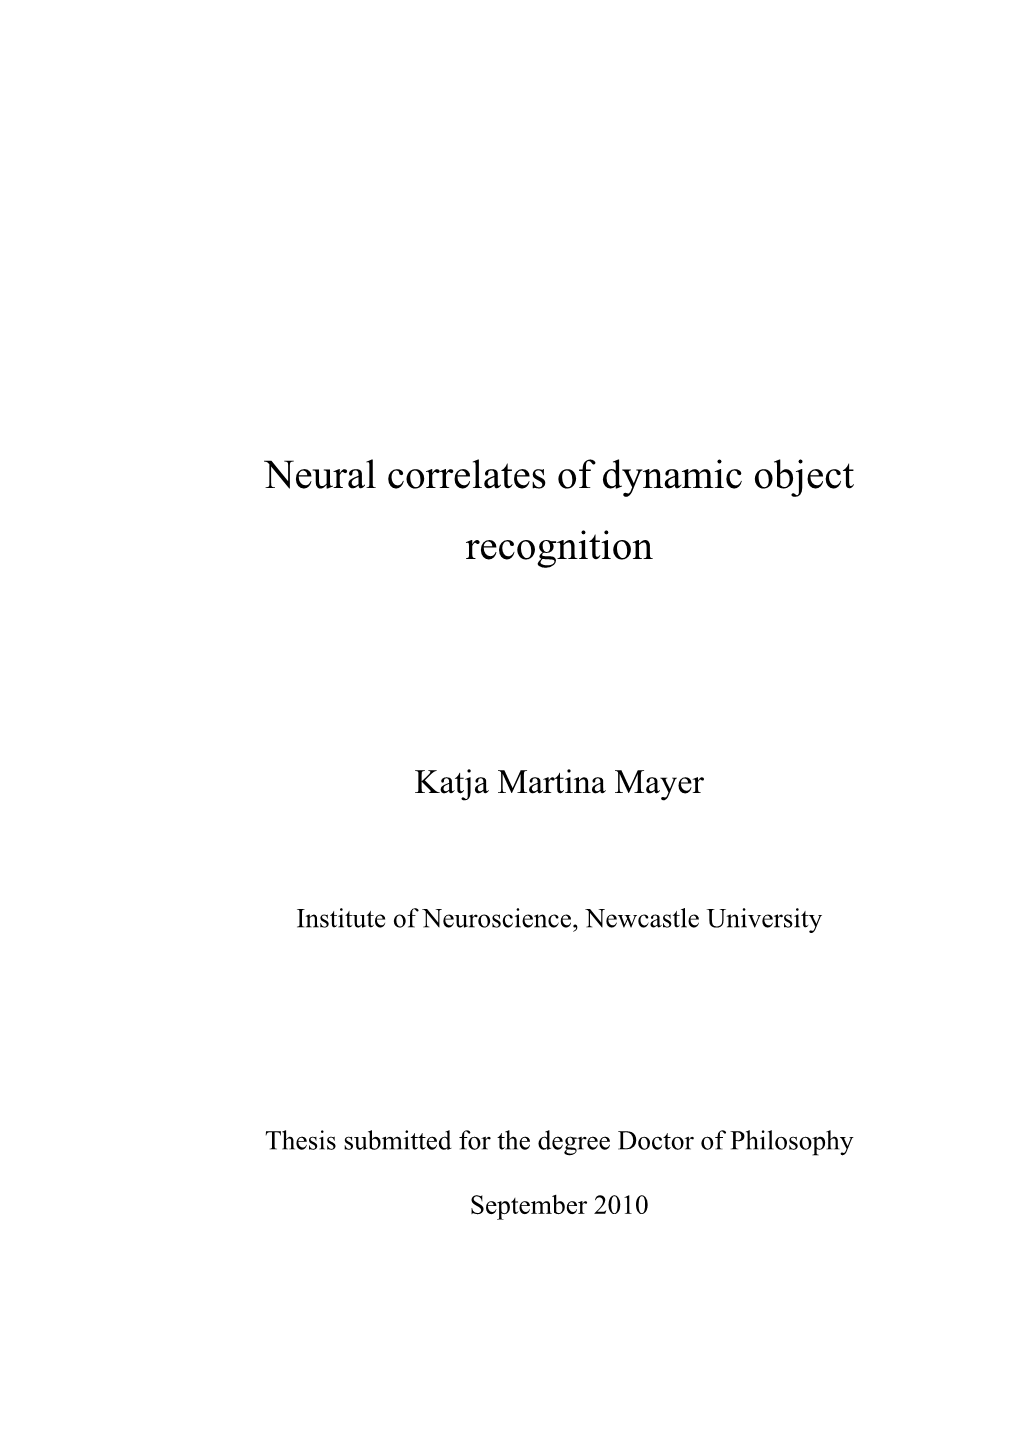 Neural Correlates of Dynamic Object Recognition